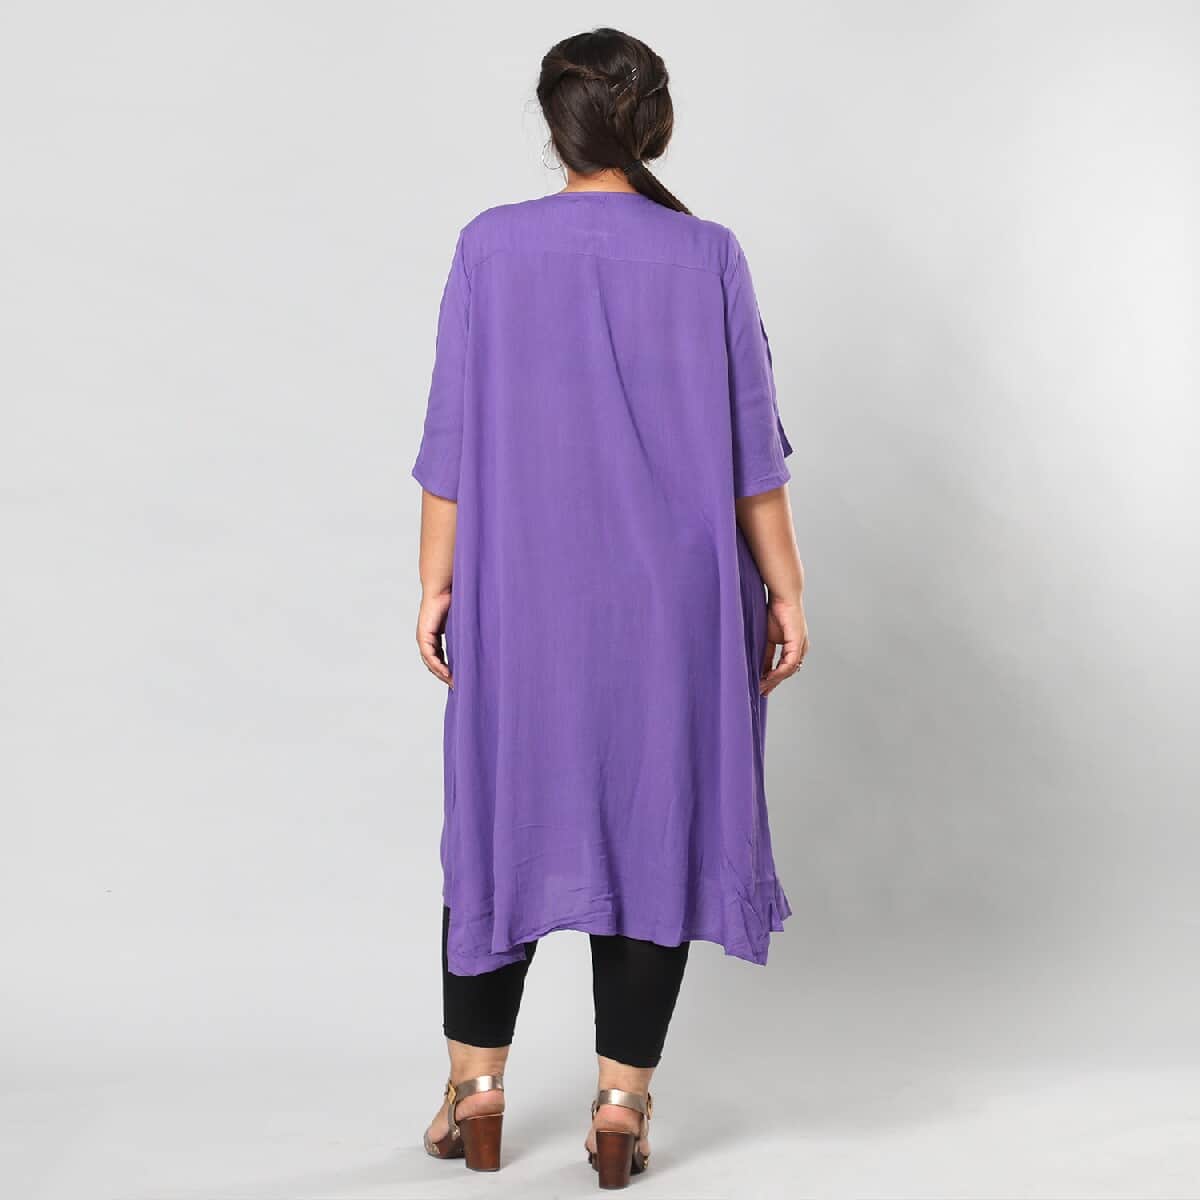 Purple 100% Rayon Top with Front Closure with Button- L/XL image number 2